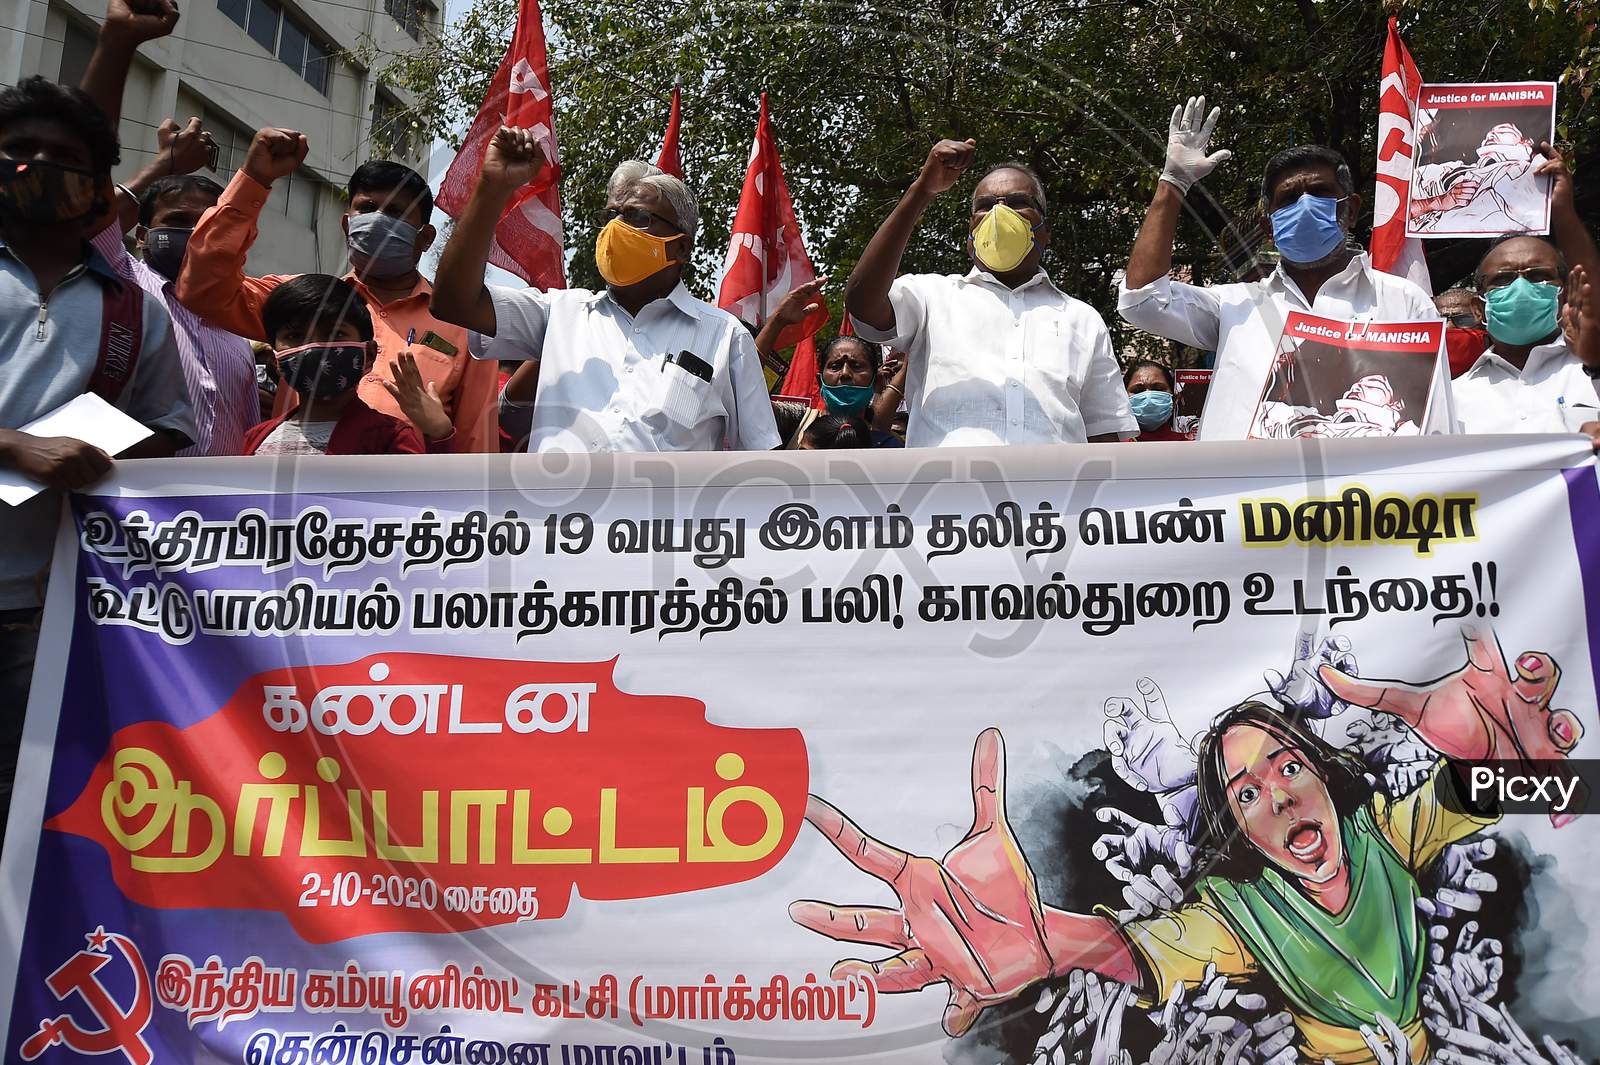 Communist Party of India (Marxist) activists stage a protest against the death of a 19-year-old woman in Hathras, in Chennai, Friday, Oct. 2,Communist Party of India (Marxist) activists stage a protest against the death of a 19-year-old woman in Hathras, in Chennai, Friday, Oct. 2,